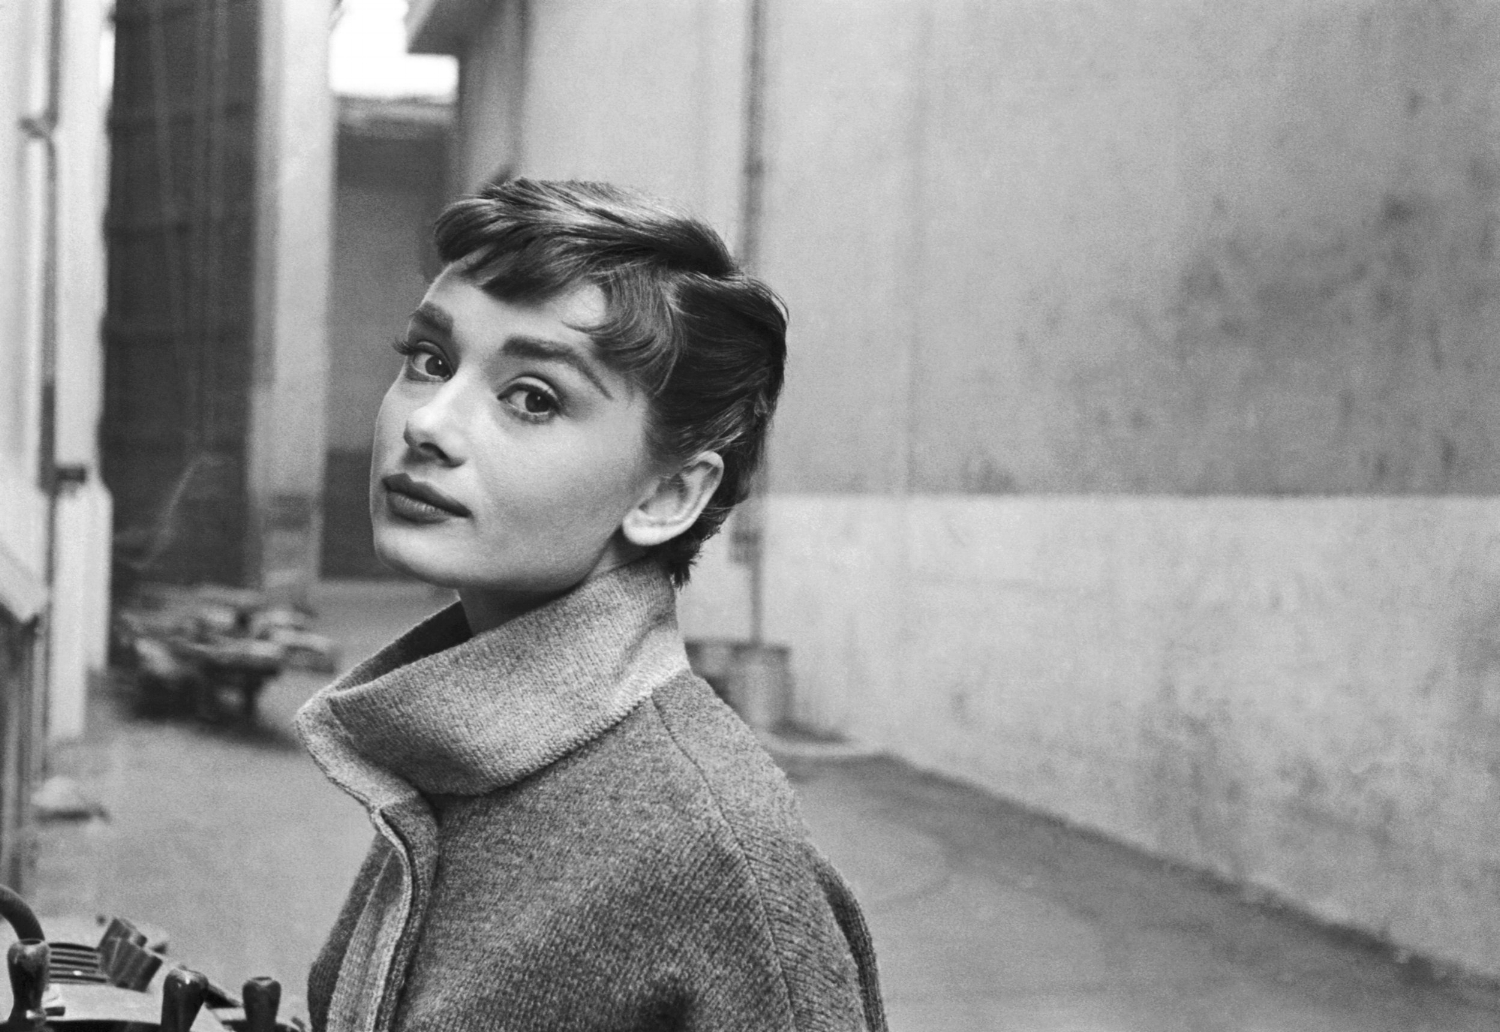 The Fashion of Audrey — The actress Audrey Hepburn photographed by Lino